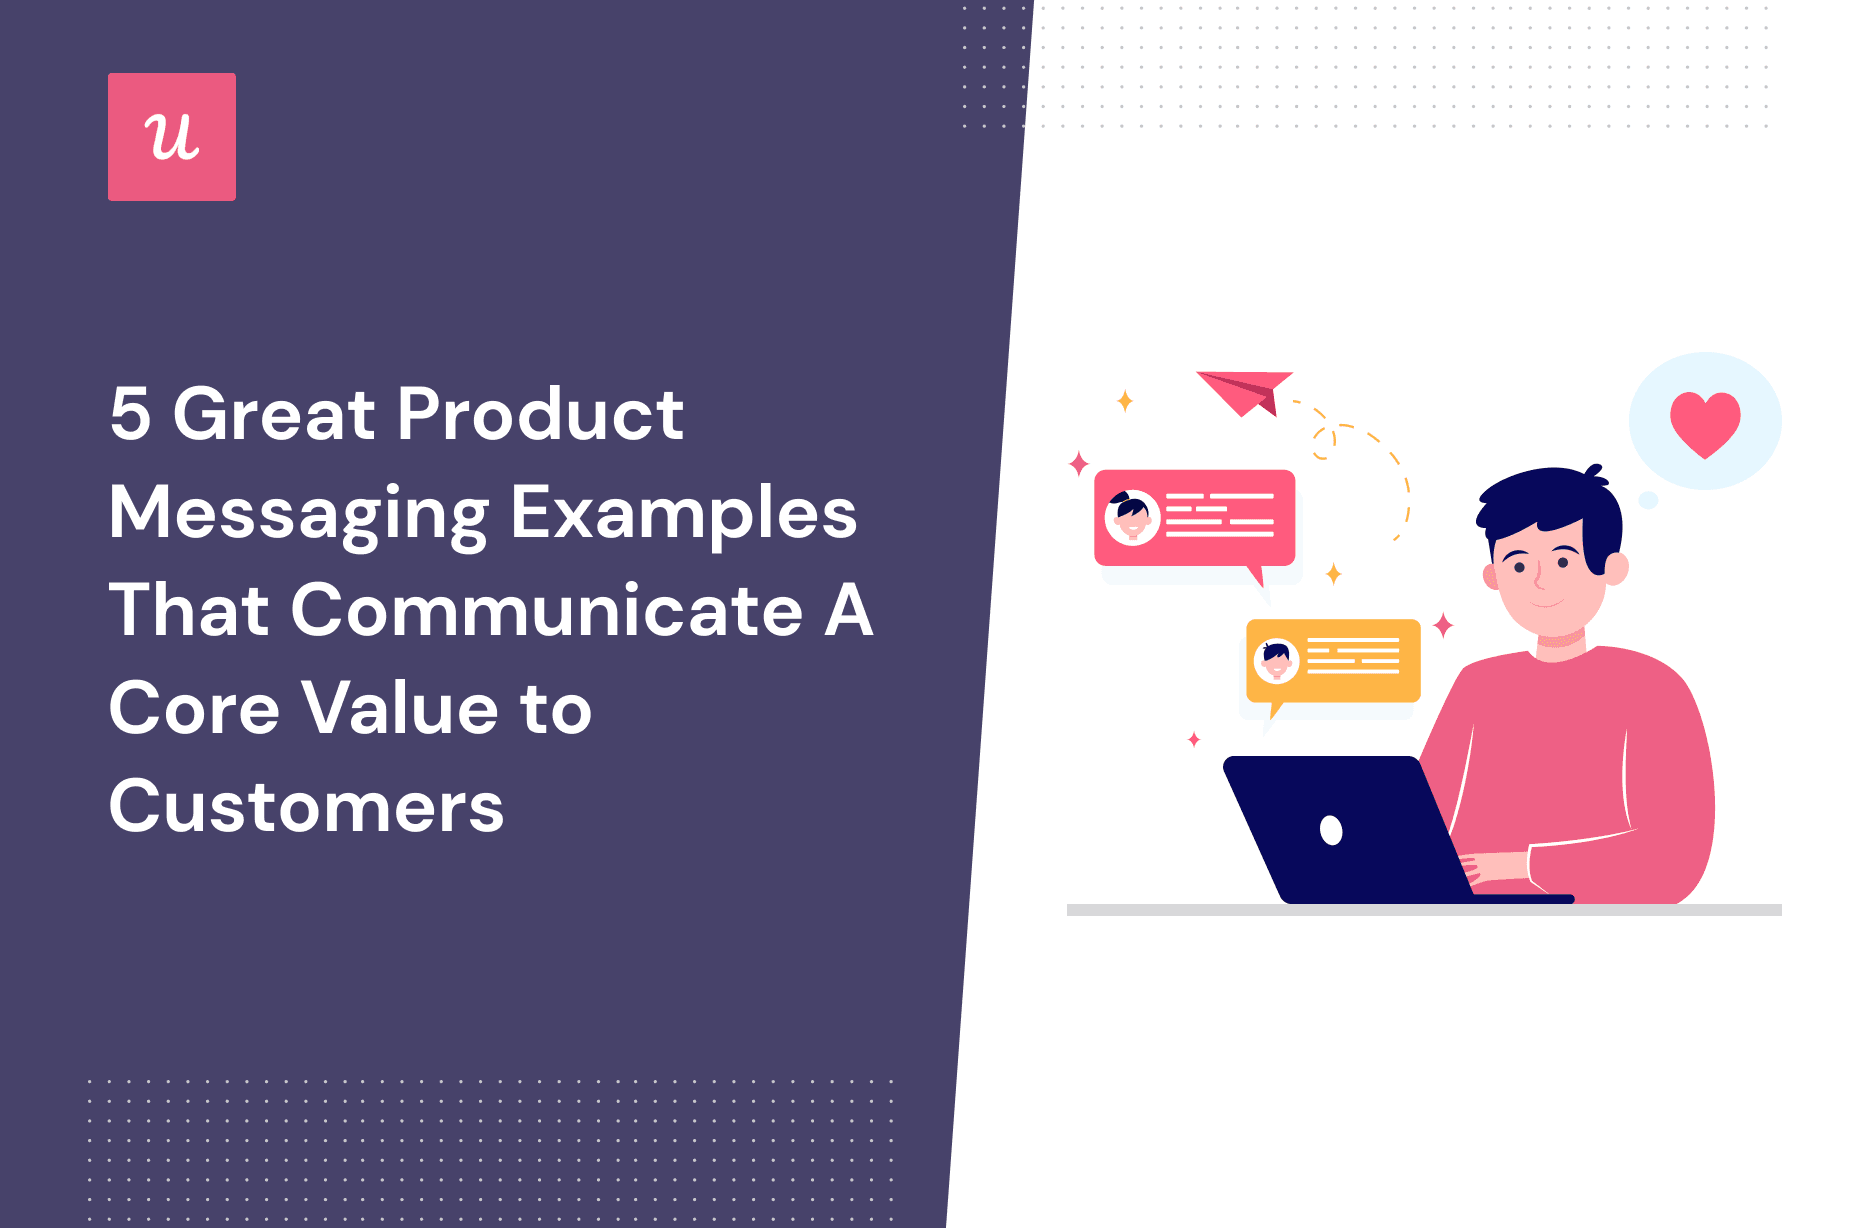 5 Best Product Messaging Examples for SaaS